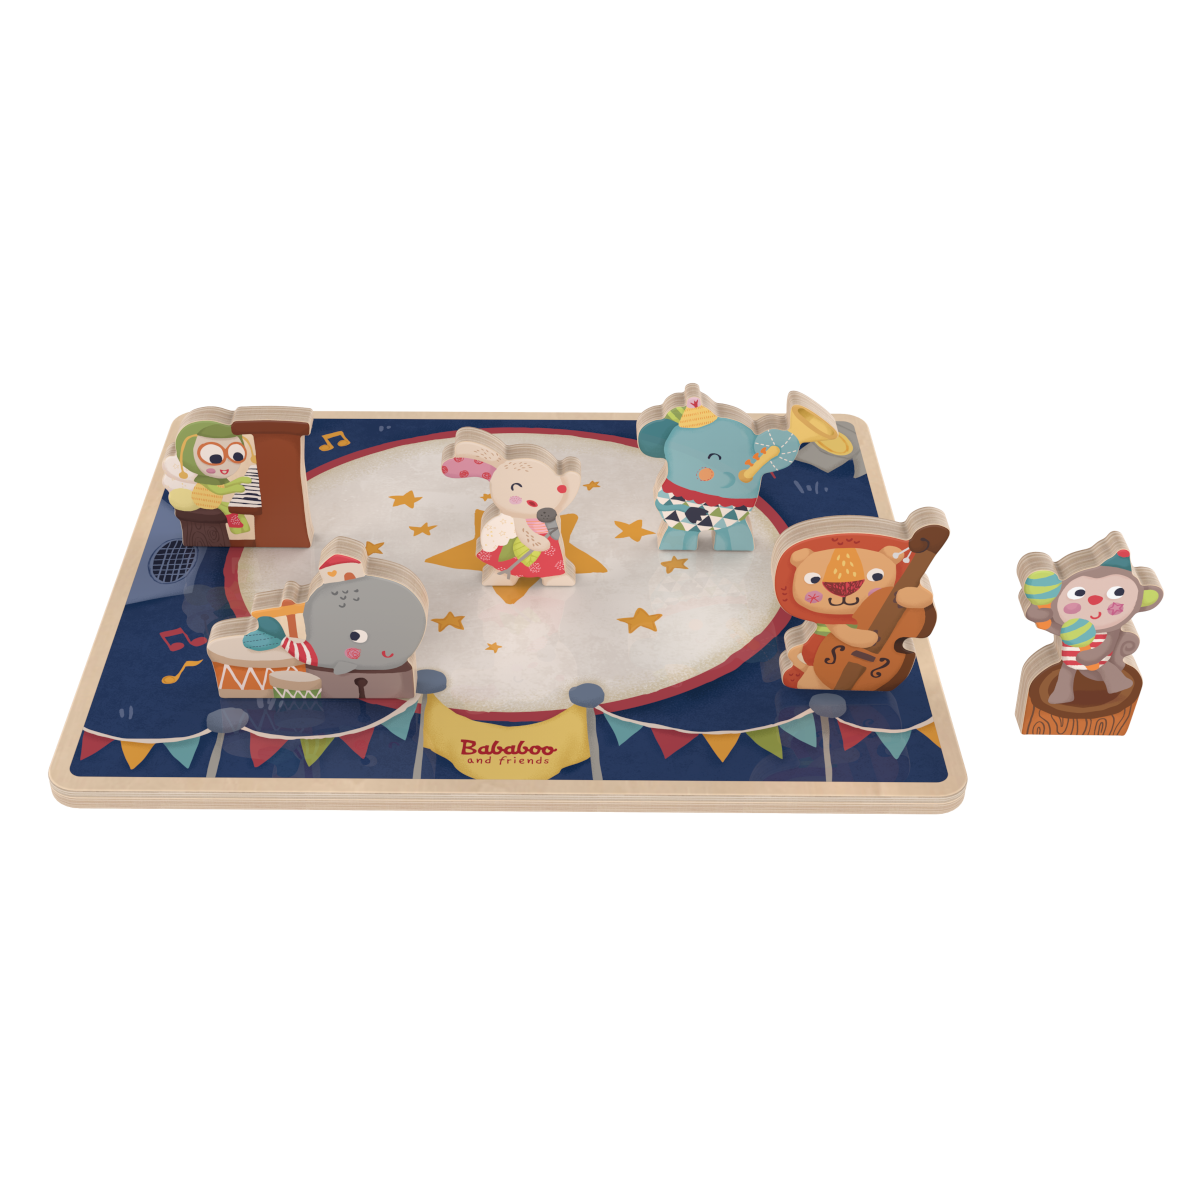 The "Bababoo and friends" Band Play Figure Puzzle product image